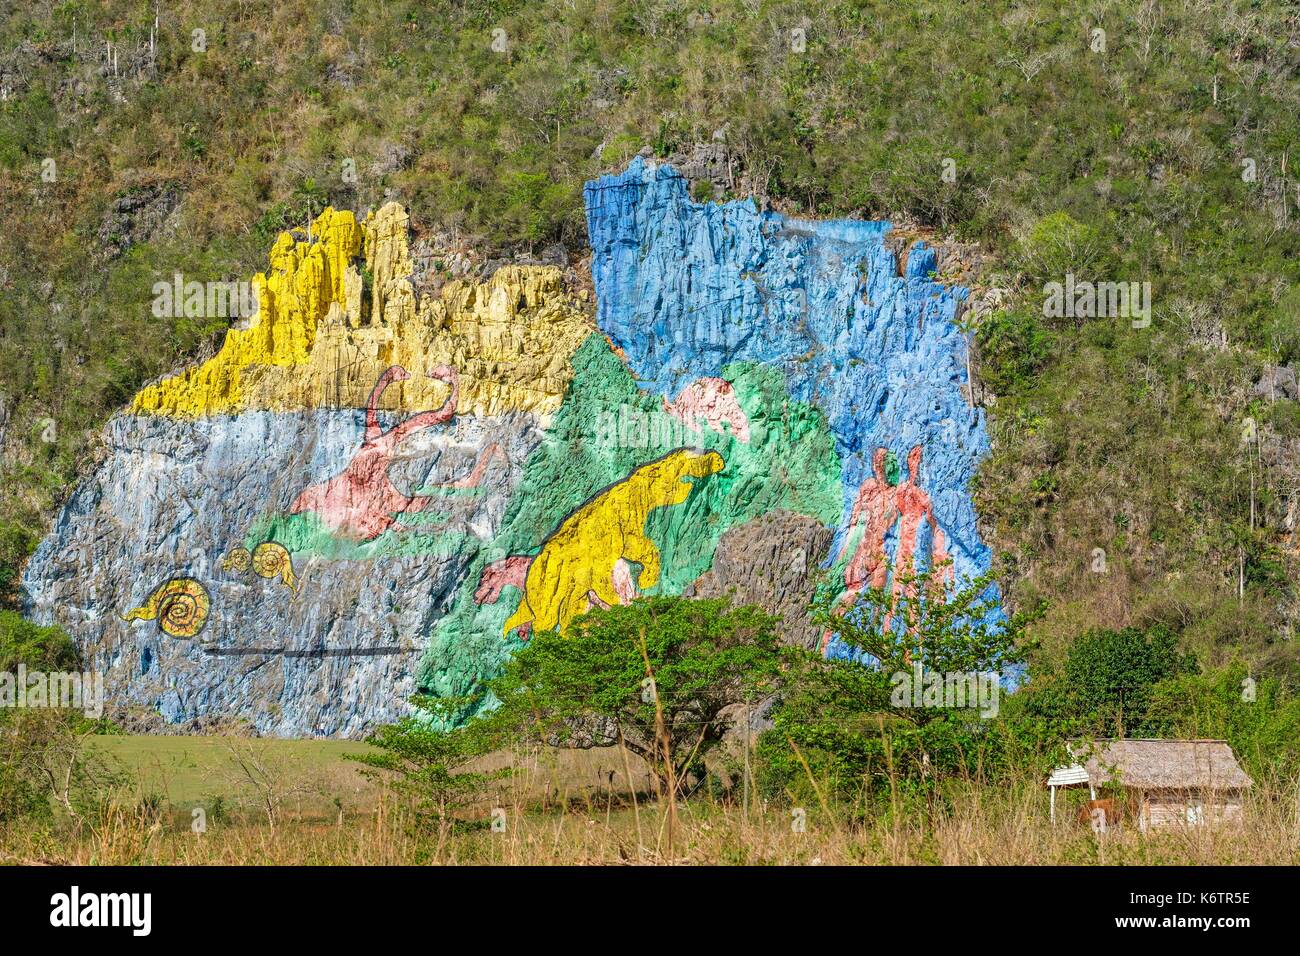 Cuba, Pinar del Rio province, Vinales, Vinales national park, Vinales valley, a UNESCO World Heritage site, the Prehistoric Wall, 180 m length and 120 m large, is a frescoe on the Mogote Dos Hermanas commissioned by Fidel Castro in 1961 Stock Photo